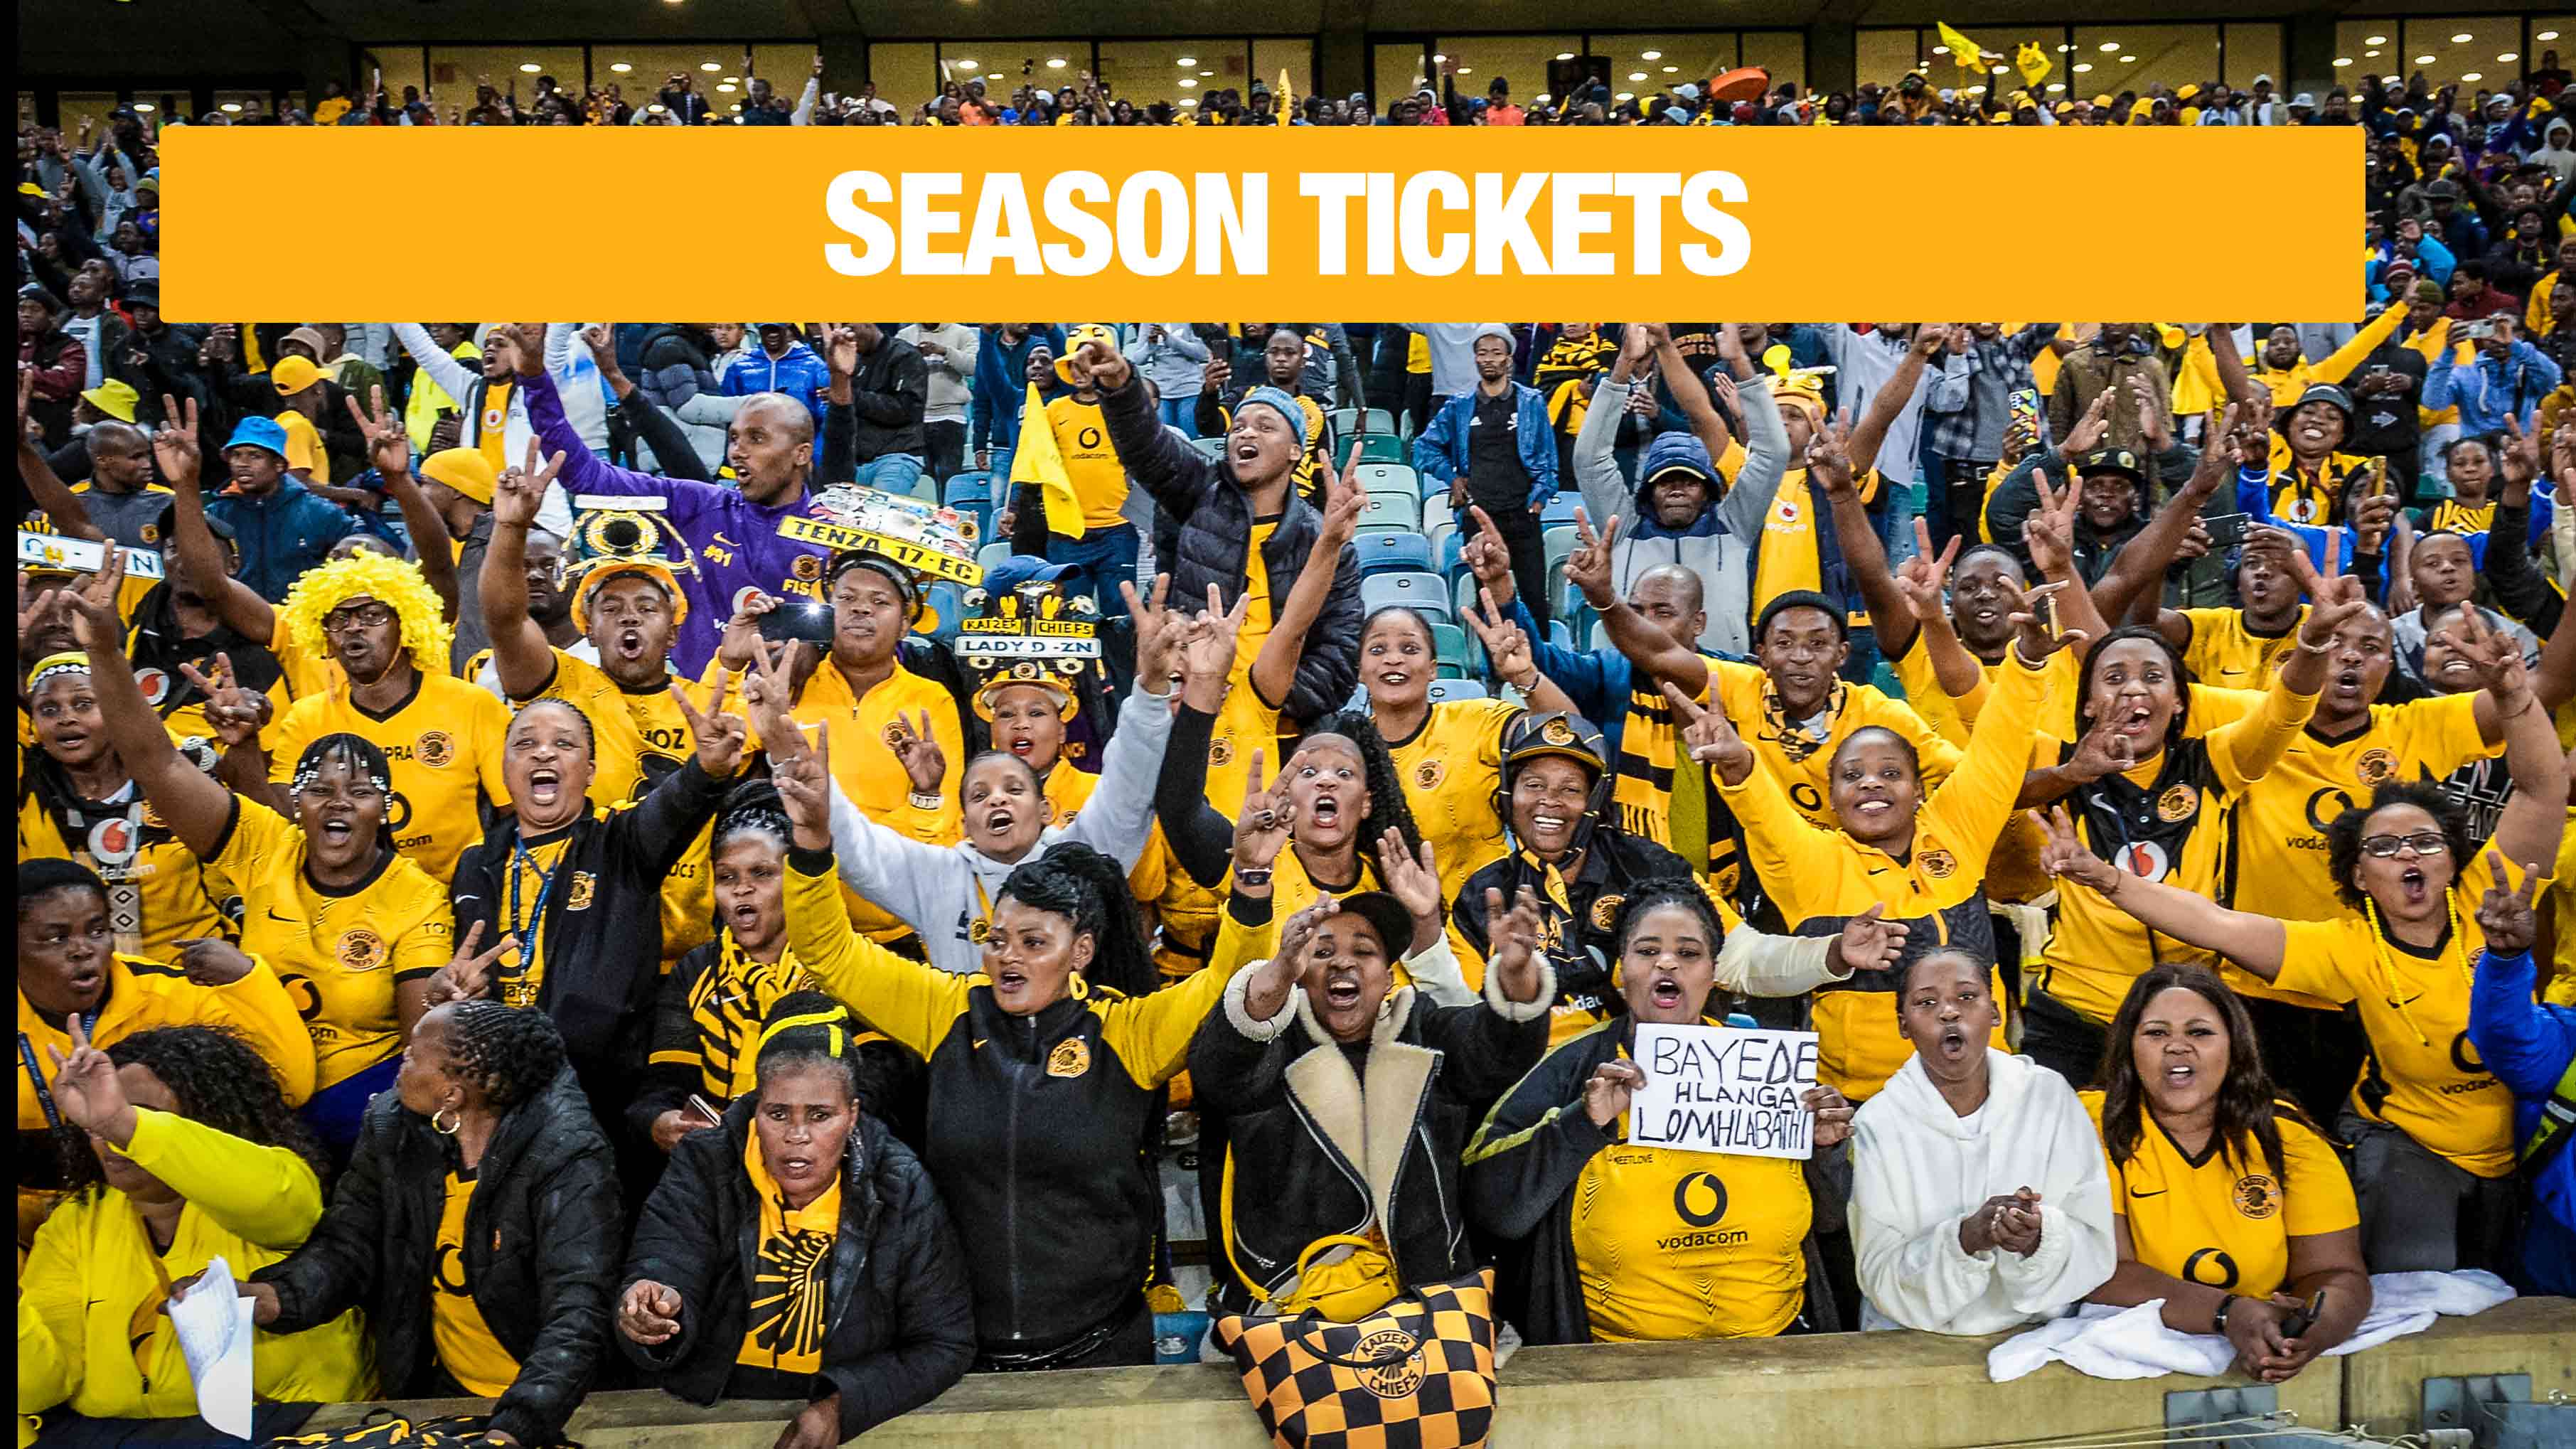 The idea behind introducing season tickets comes as the Club and SMSA move to make it more convenient for fans to attend Kaizer Chiefs home matches without having to purchase tickets game-by-game.